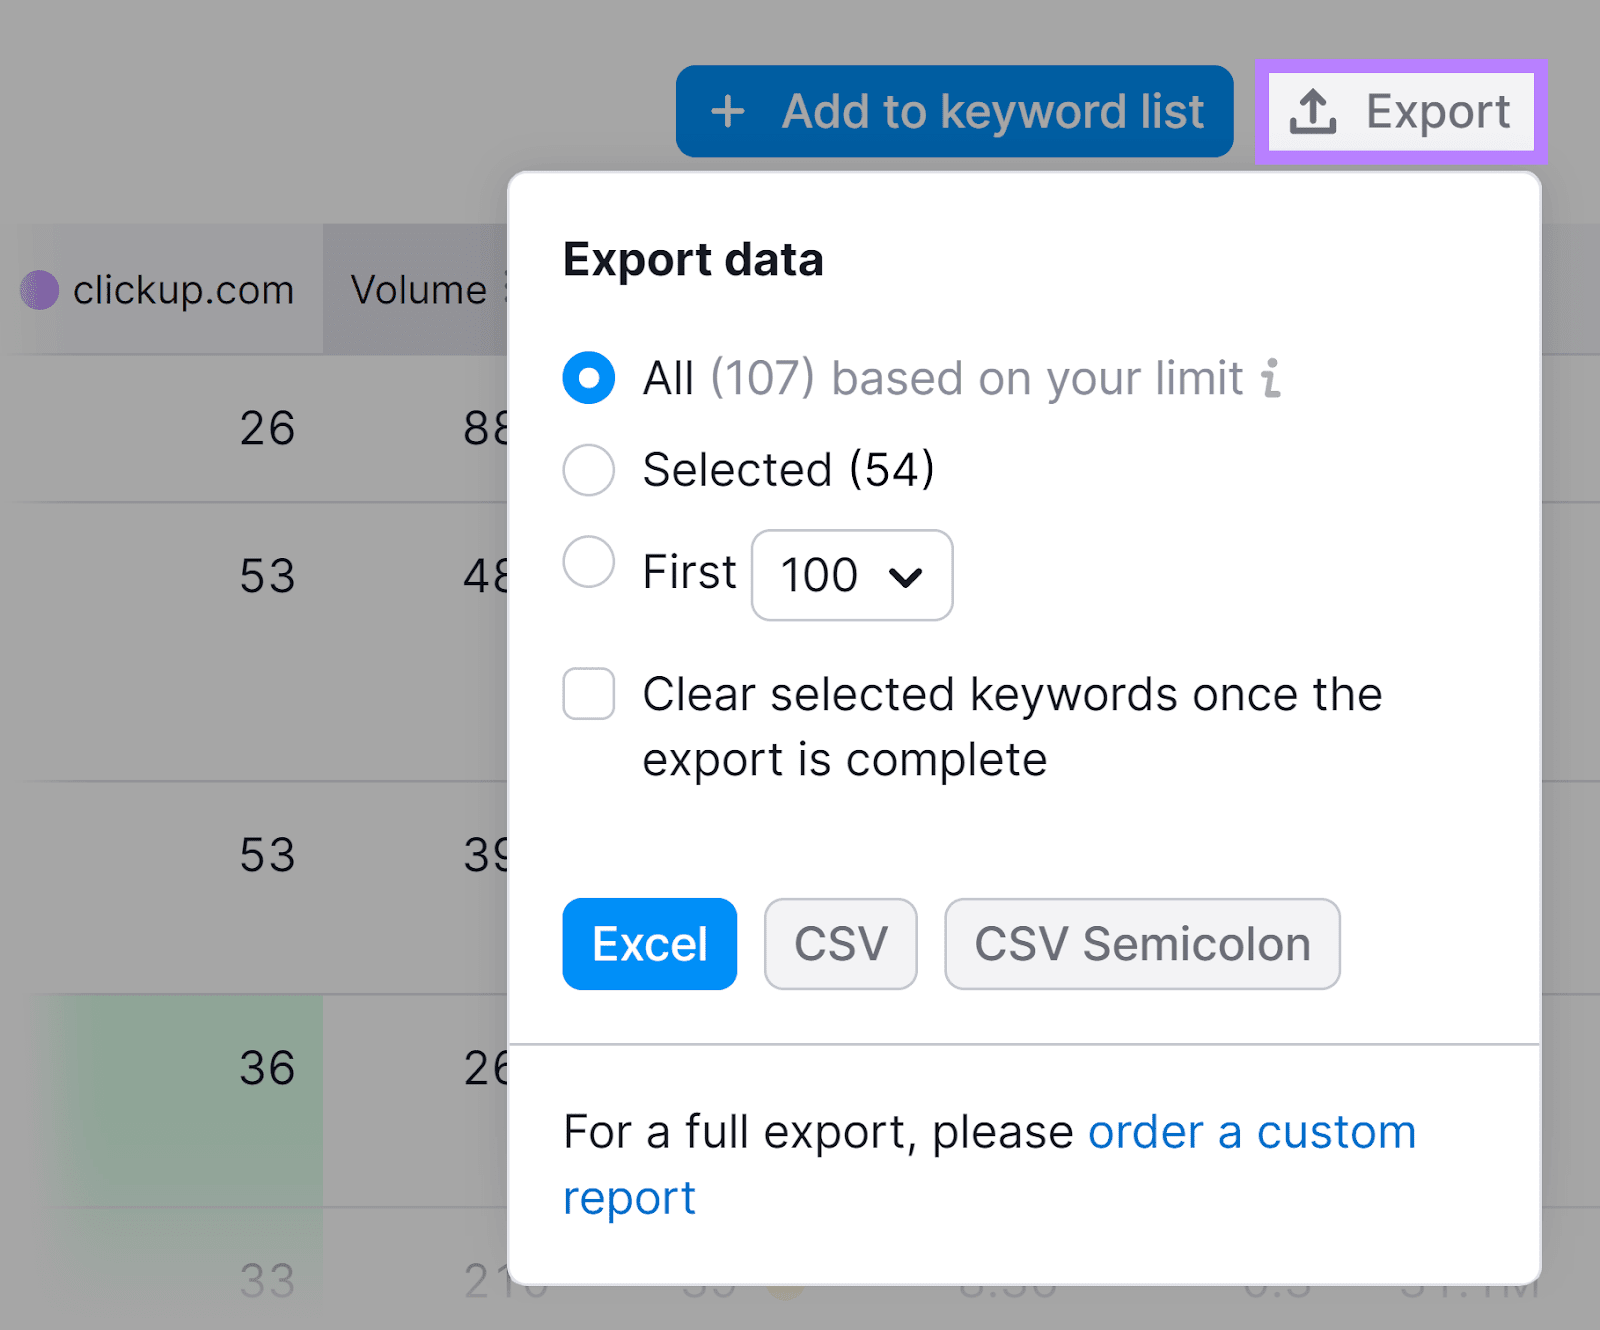 Export button clicked and highlighted.